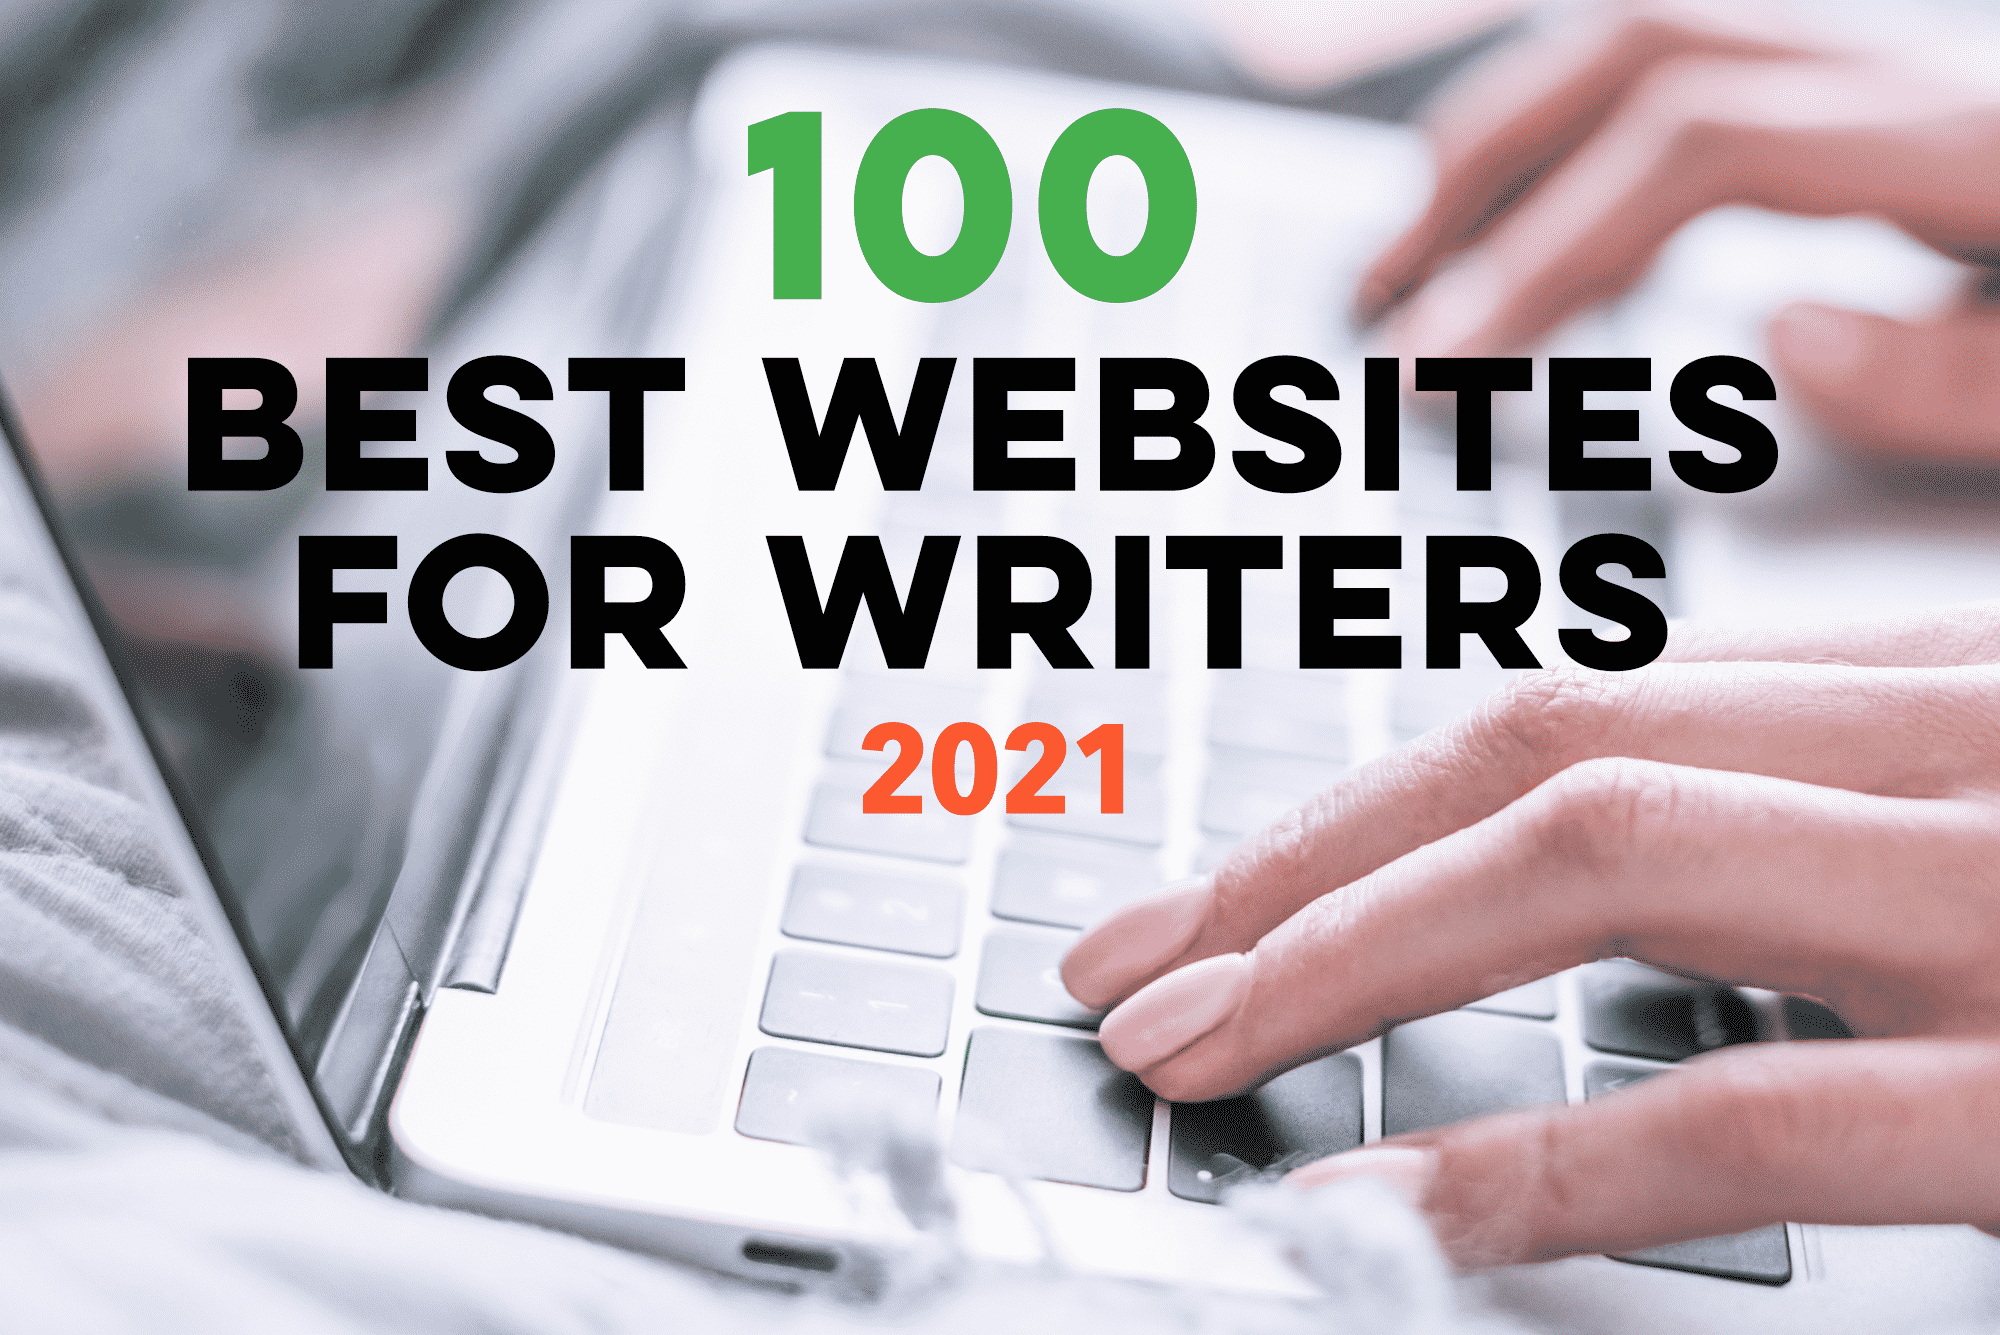 Graphic that says "100 best websites for writers 2021" over a picture of hands typing on a keyboard